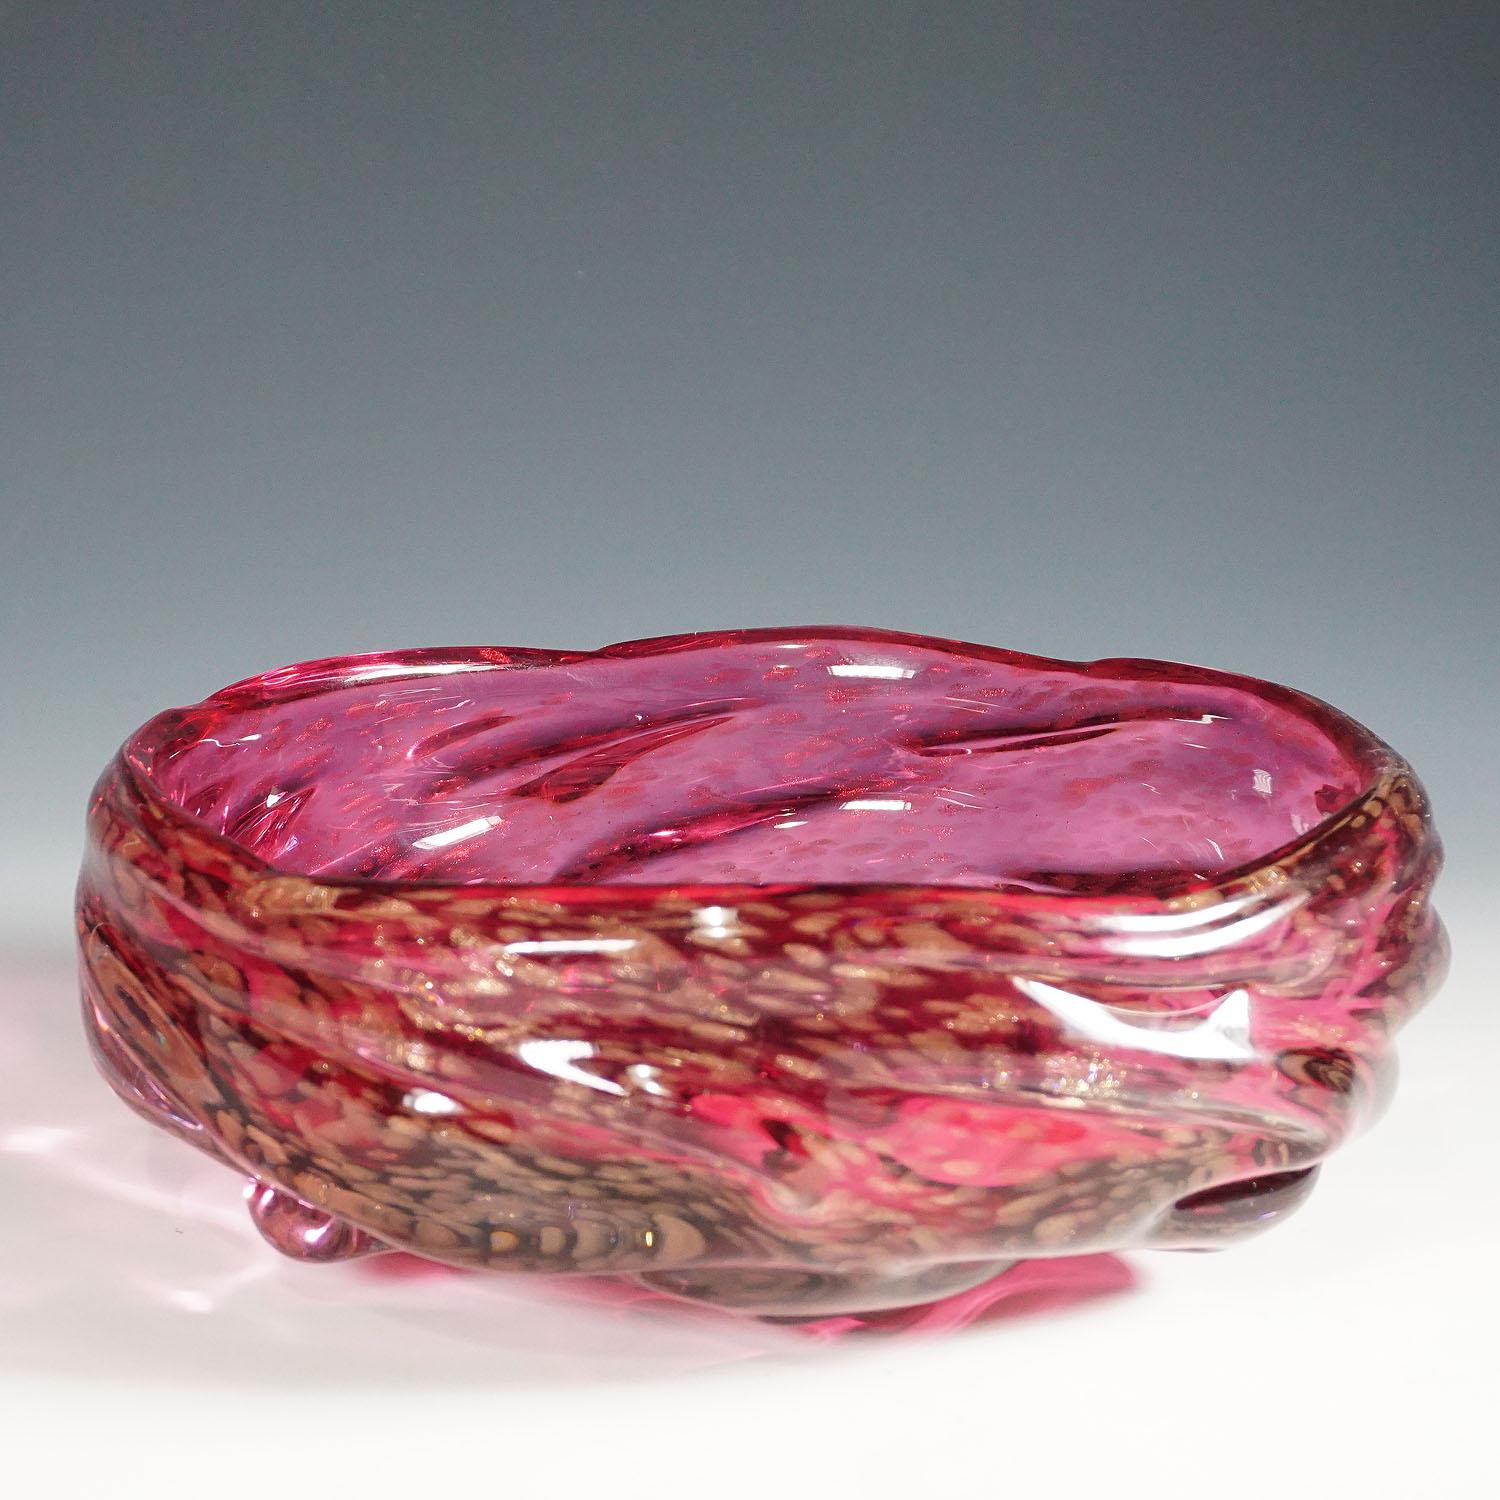 A large Murano glass bowl most probably manufactured by Seguso Vetri d'Arte and designed by Flavio Poli circa 1950s. thick pink glass with aventurine inclusions and a clear glass overlay. 
Lit.:
marc heiremans, Seguso Vetri d'Arte, stuttgart 2014,